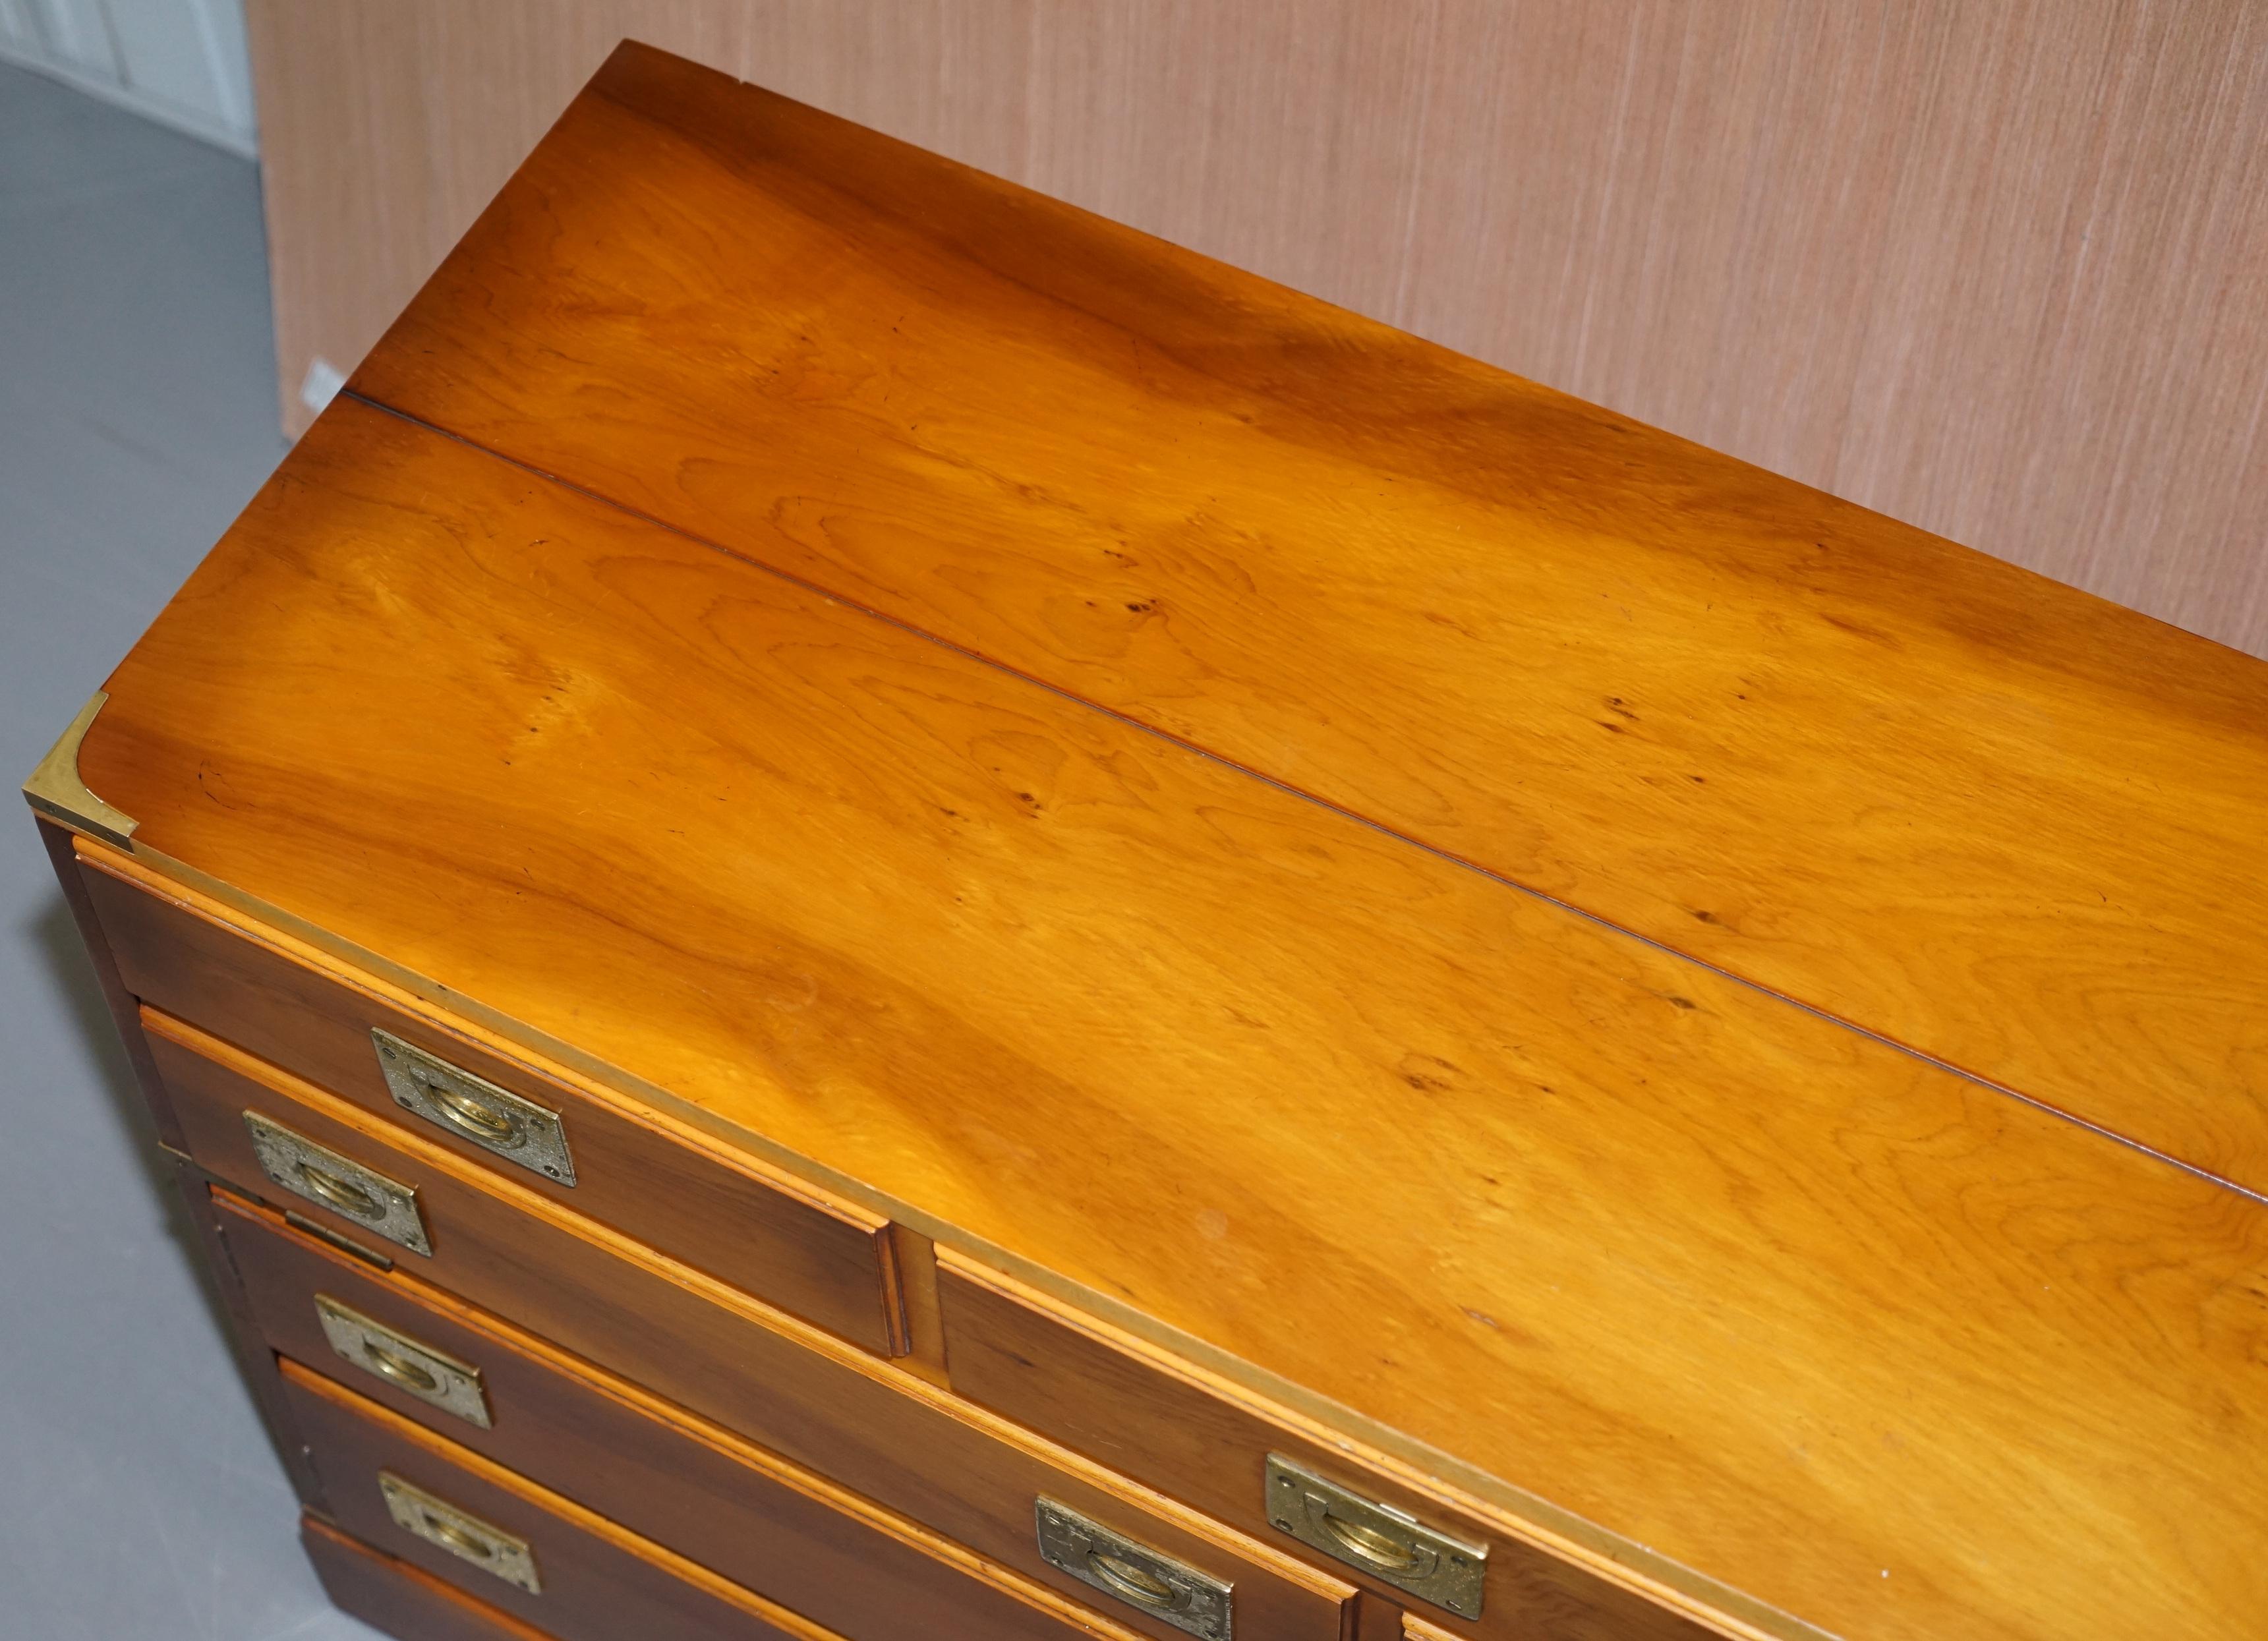 20th Century Record Player Cabinet Hidden Inside Military Campaign Chest of Drawers